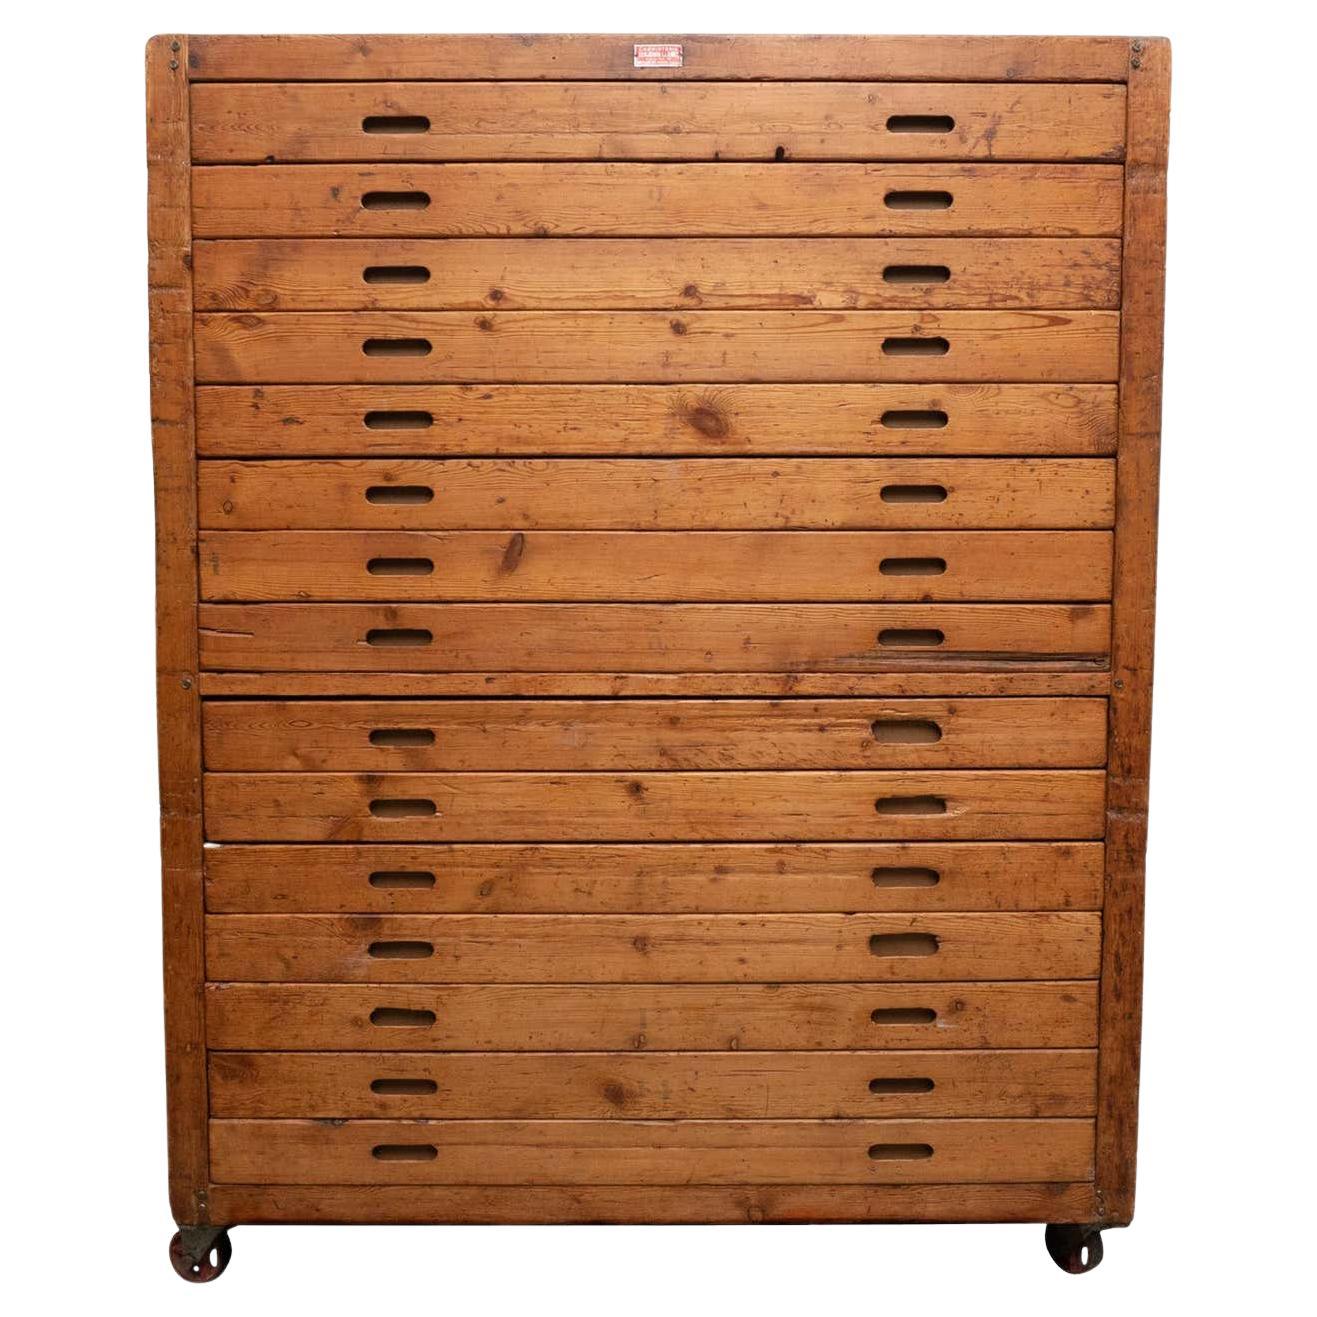 20th Century Antique Wooden Bakery Cabinet For Sale